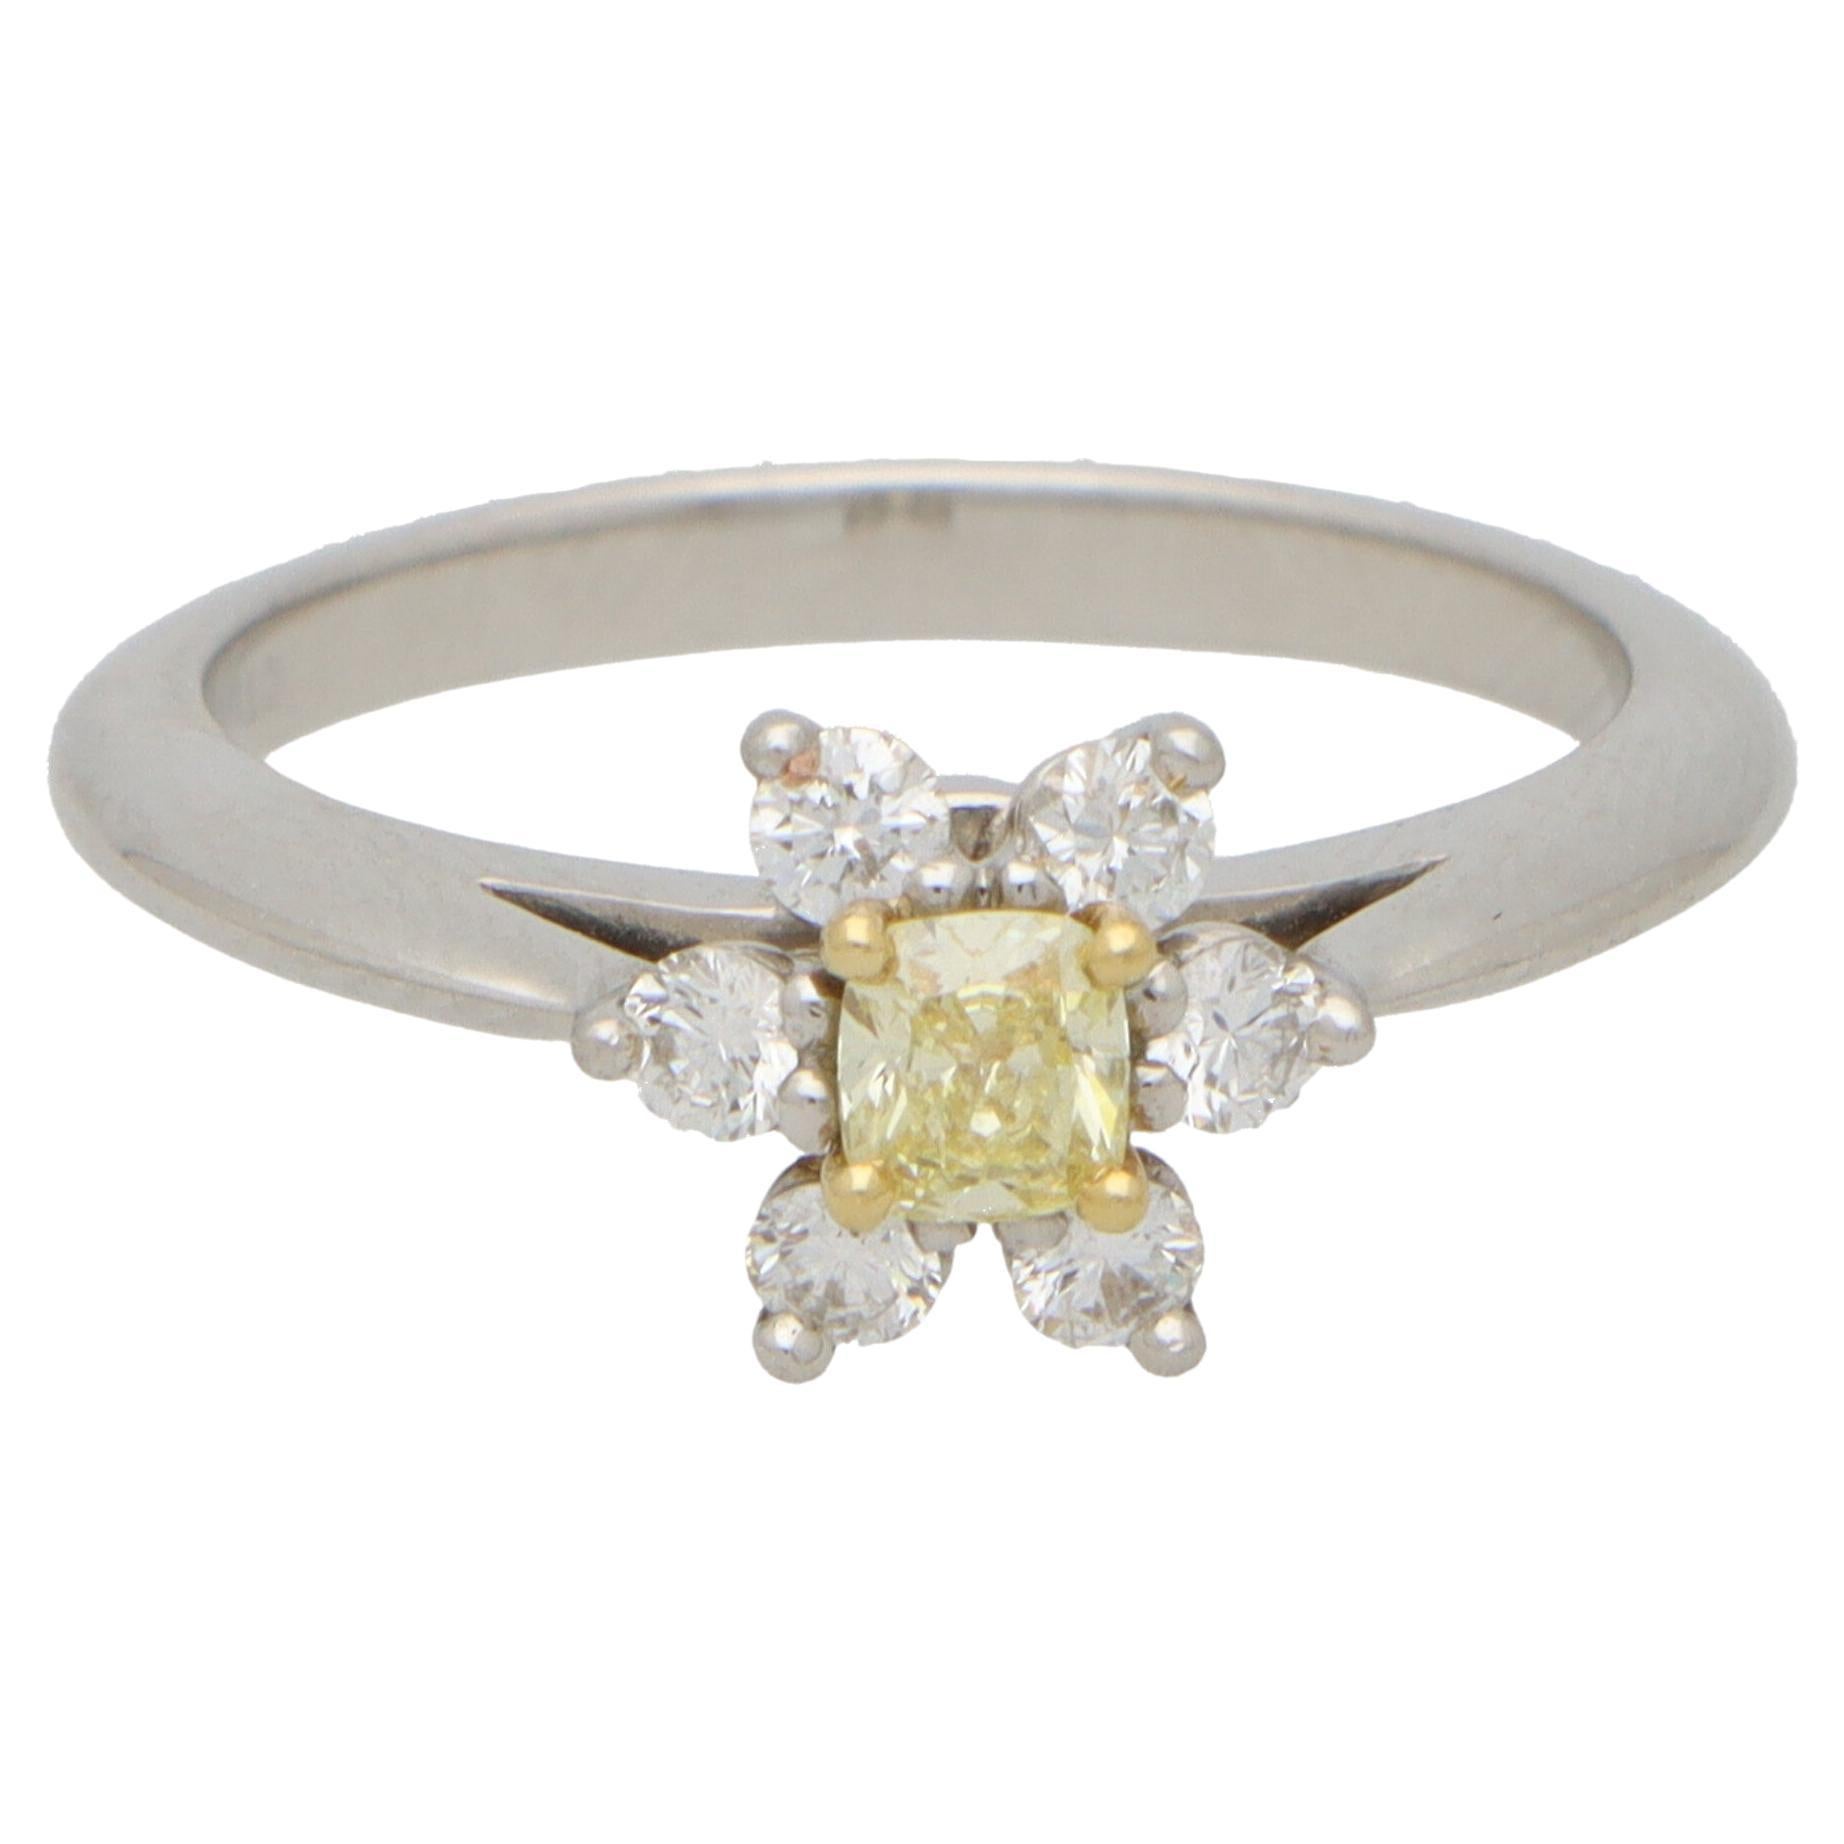 Vintage Tiffany & Co Fancy Intense Yellow Diamond Cluster Ring in Platinum